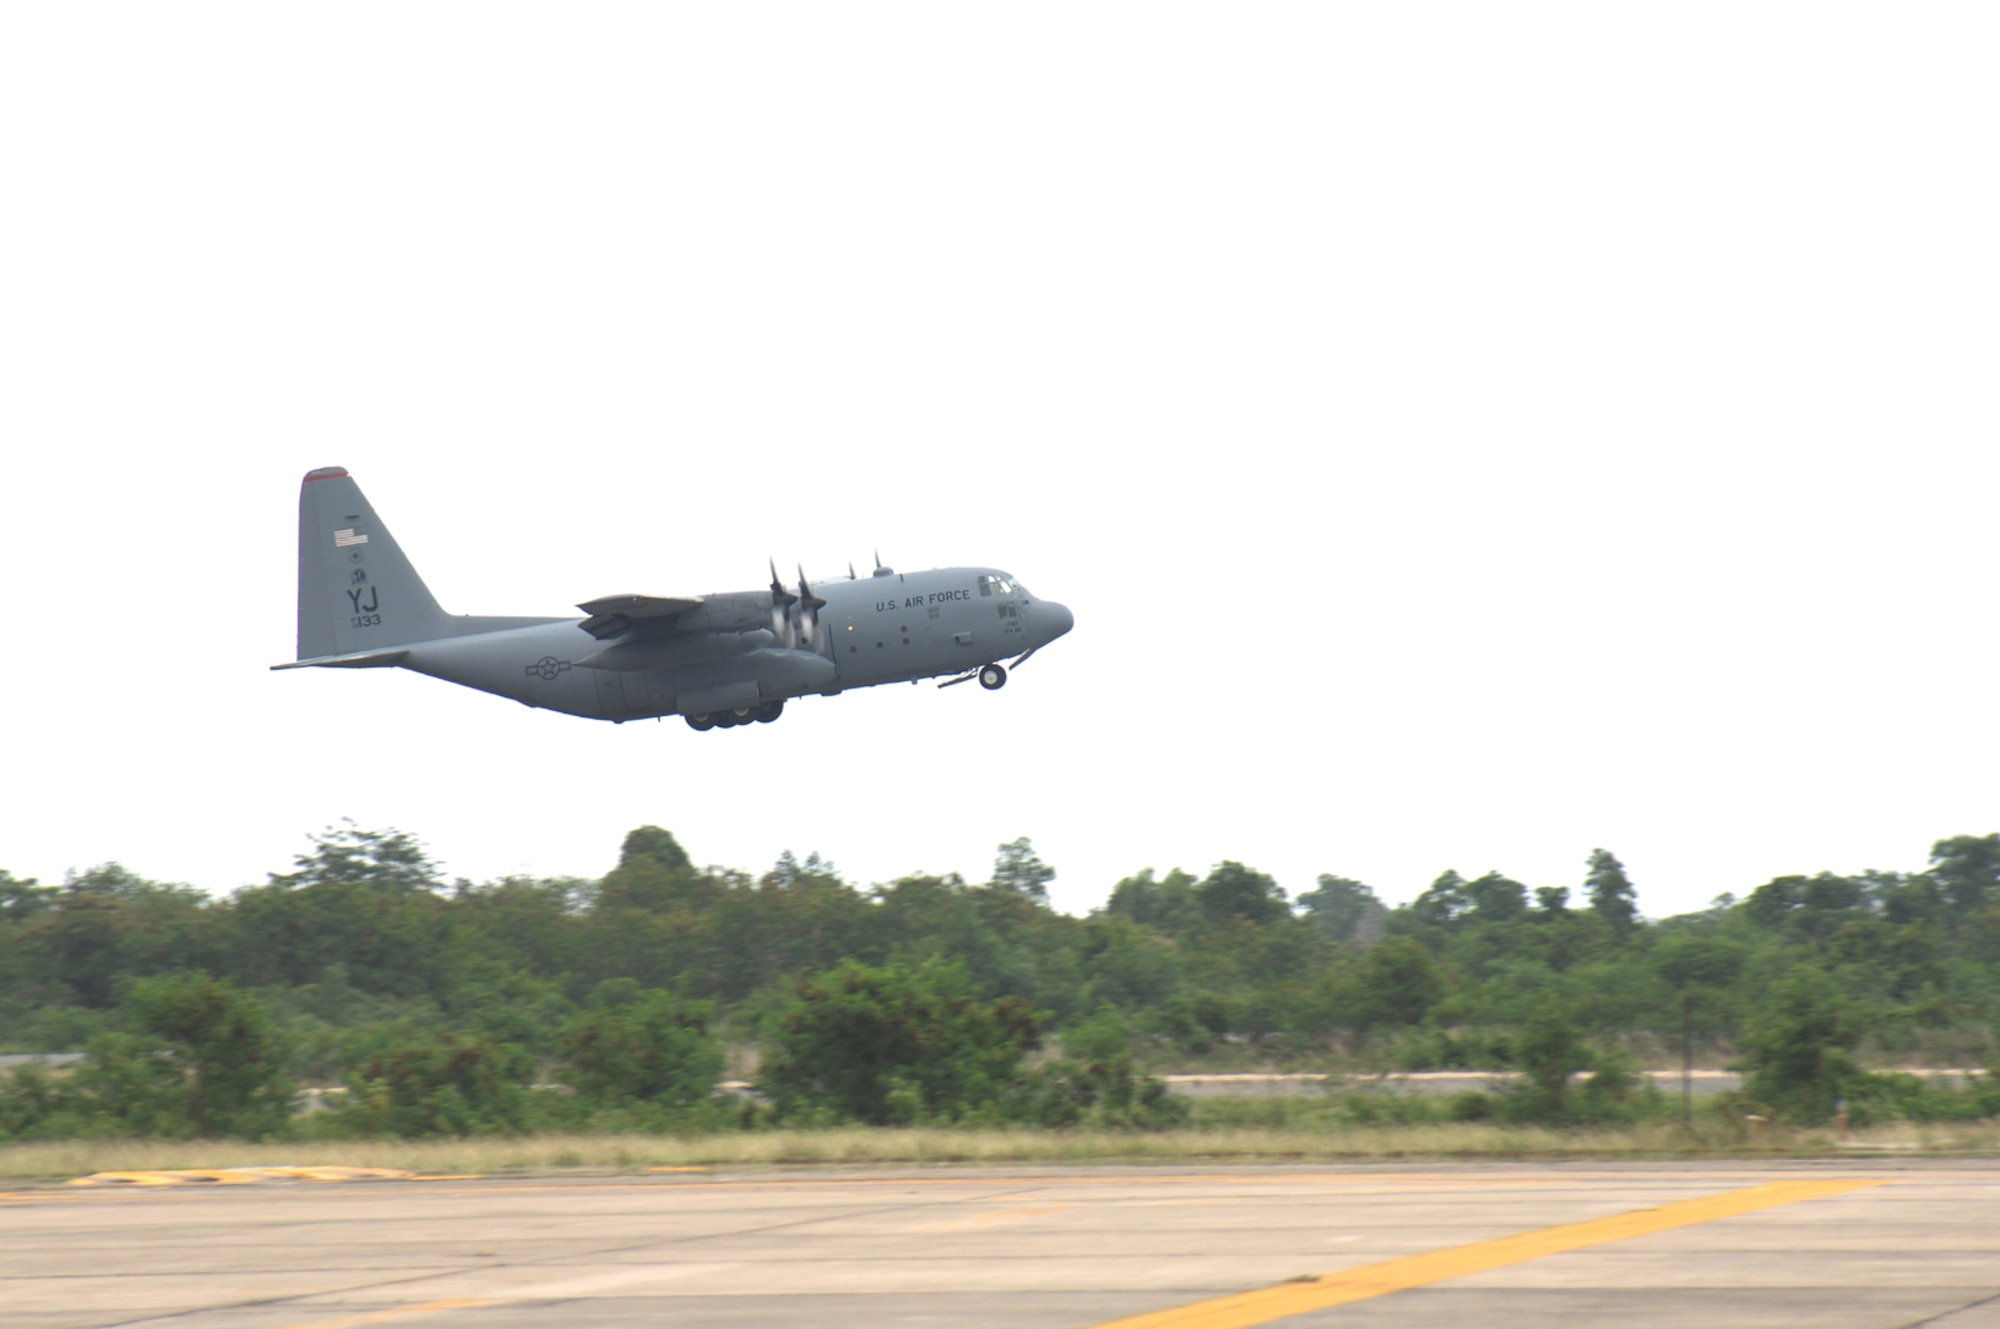 UTAPAO, Thailand - A C-130 Hercules flown in from Yokota Air Base, Japan, departs Utapao International Airport for the first flight into Burma to provide humanitarian relief to the victims of Cyclone Nargis May 12. (USAF Photo/Senior Airman Sonya Croston)